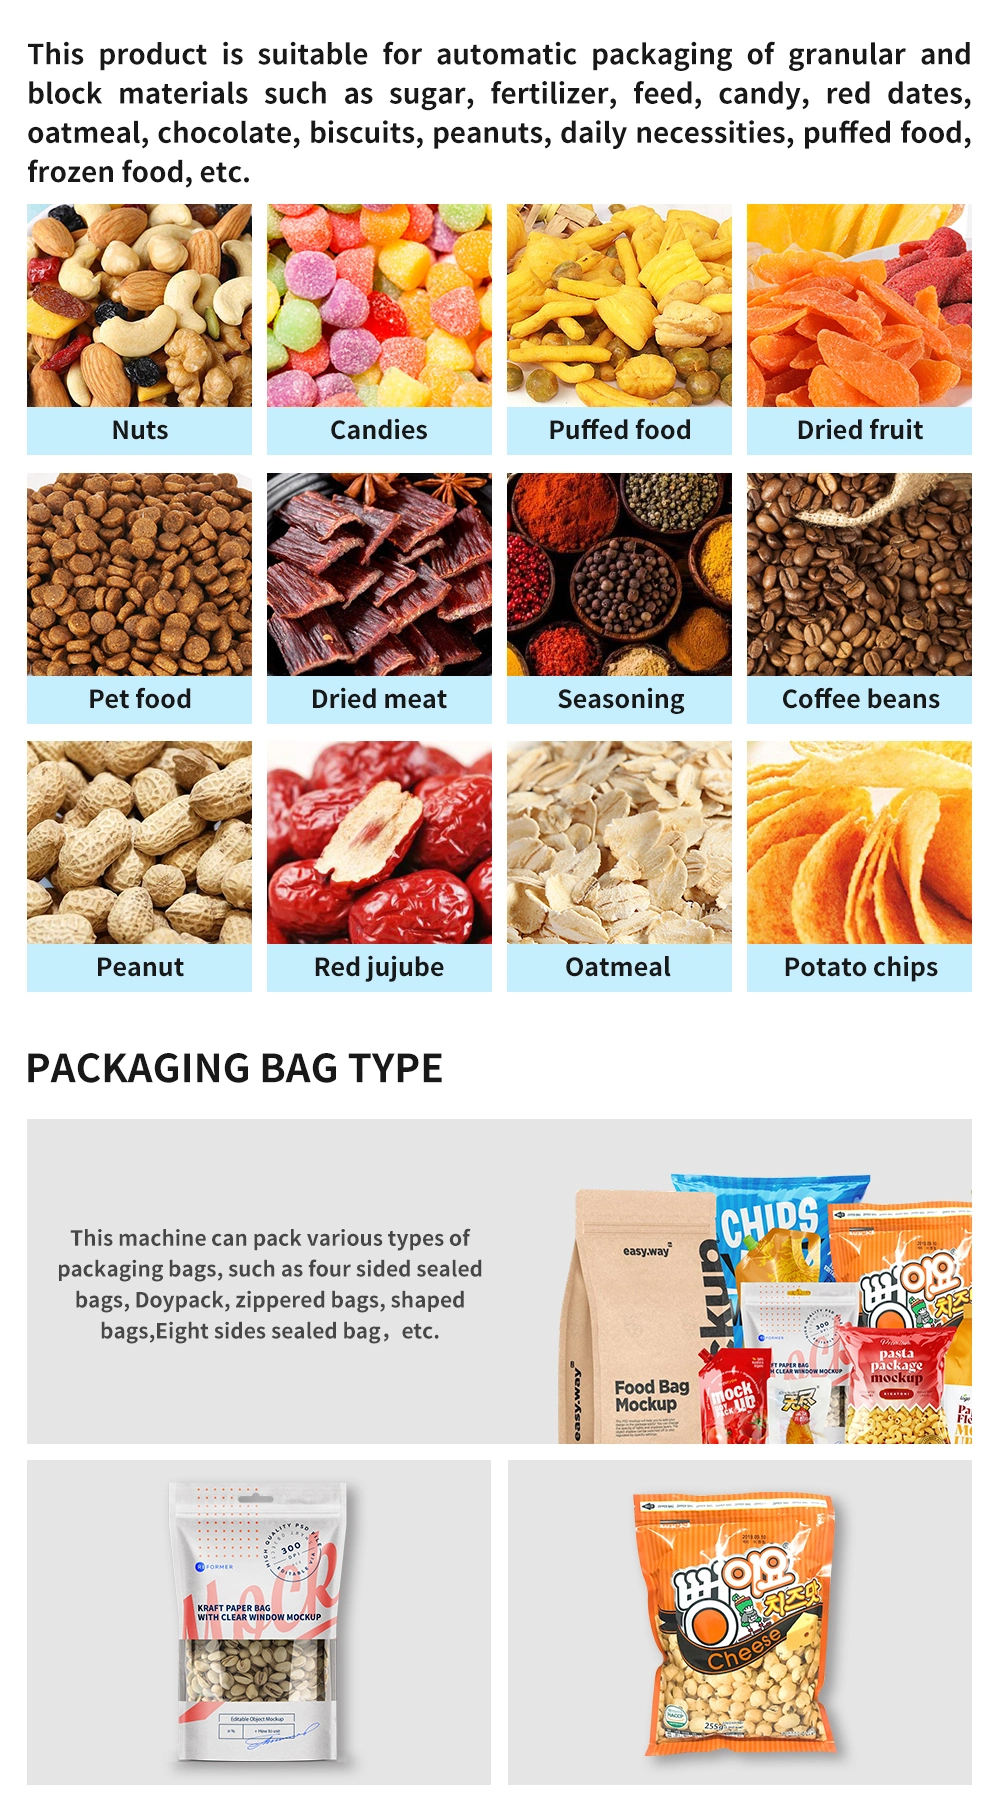 Automatic Electronic Combined Scale Nuts/Cabdues/Puffed Food/Dried Fruit/Pet Food/Seasoning/Coffe Beans/Peanut/Oatmeal/Chips/Meat Packing Machine